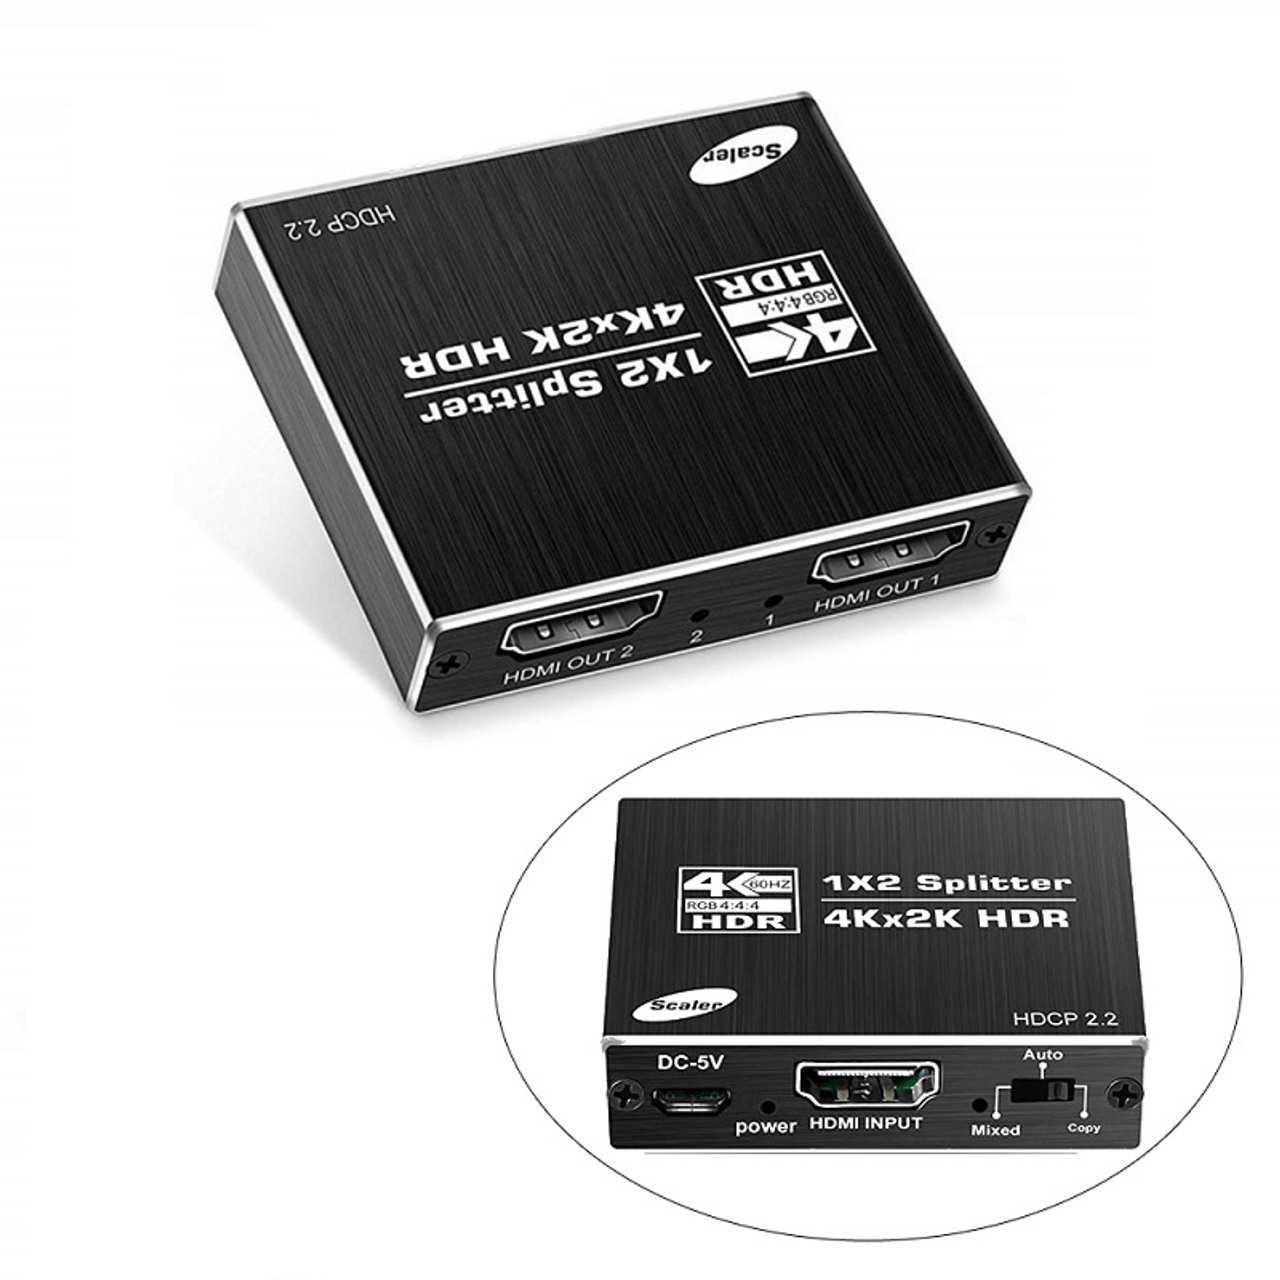 HDMI v2.0 Splitter 1 In 2 Out HDCP 2.2 With Power Supply 4K@60Hz UltraHD Supports Foxtel UHD PS3 PS4 Blu-Ray STB XBox